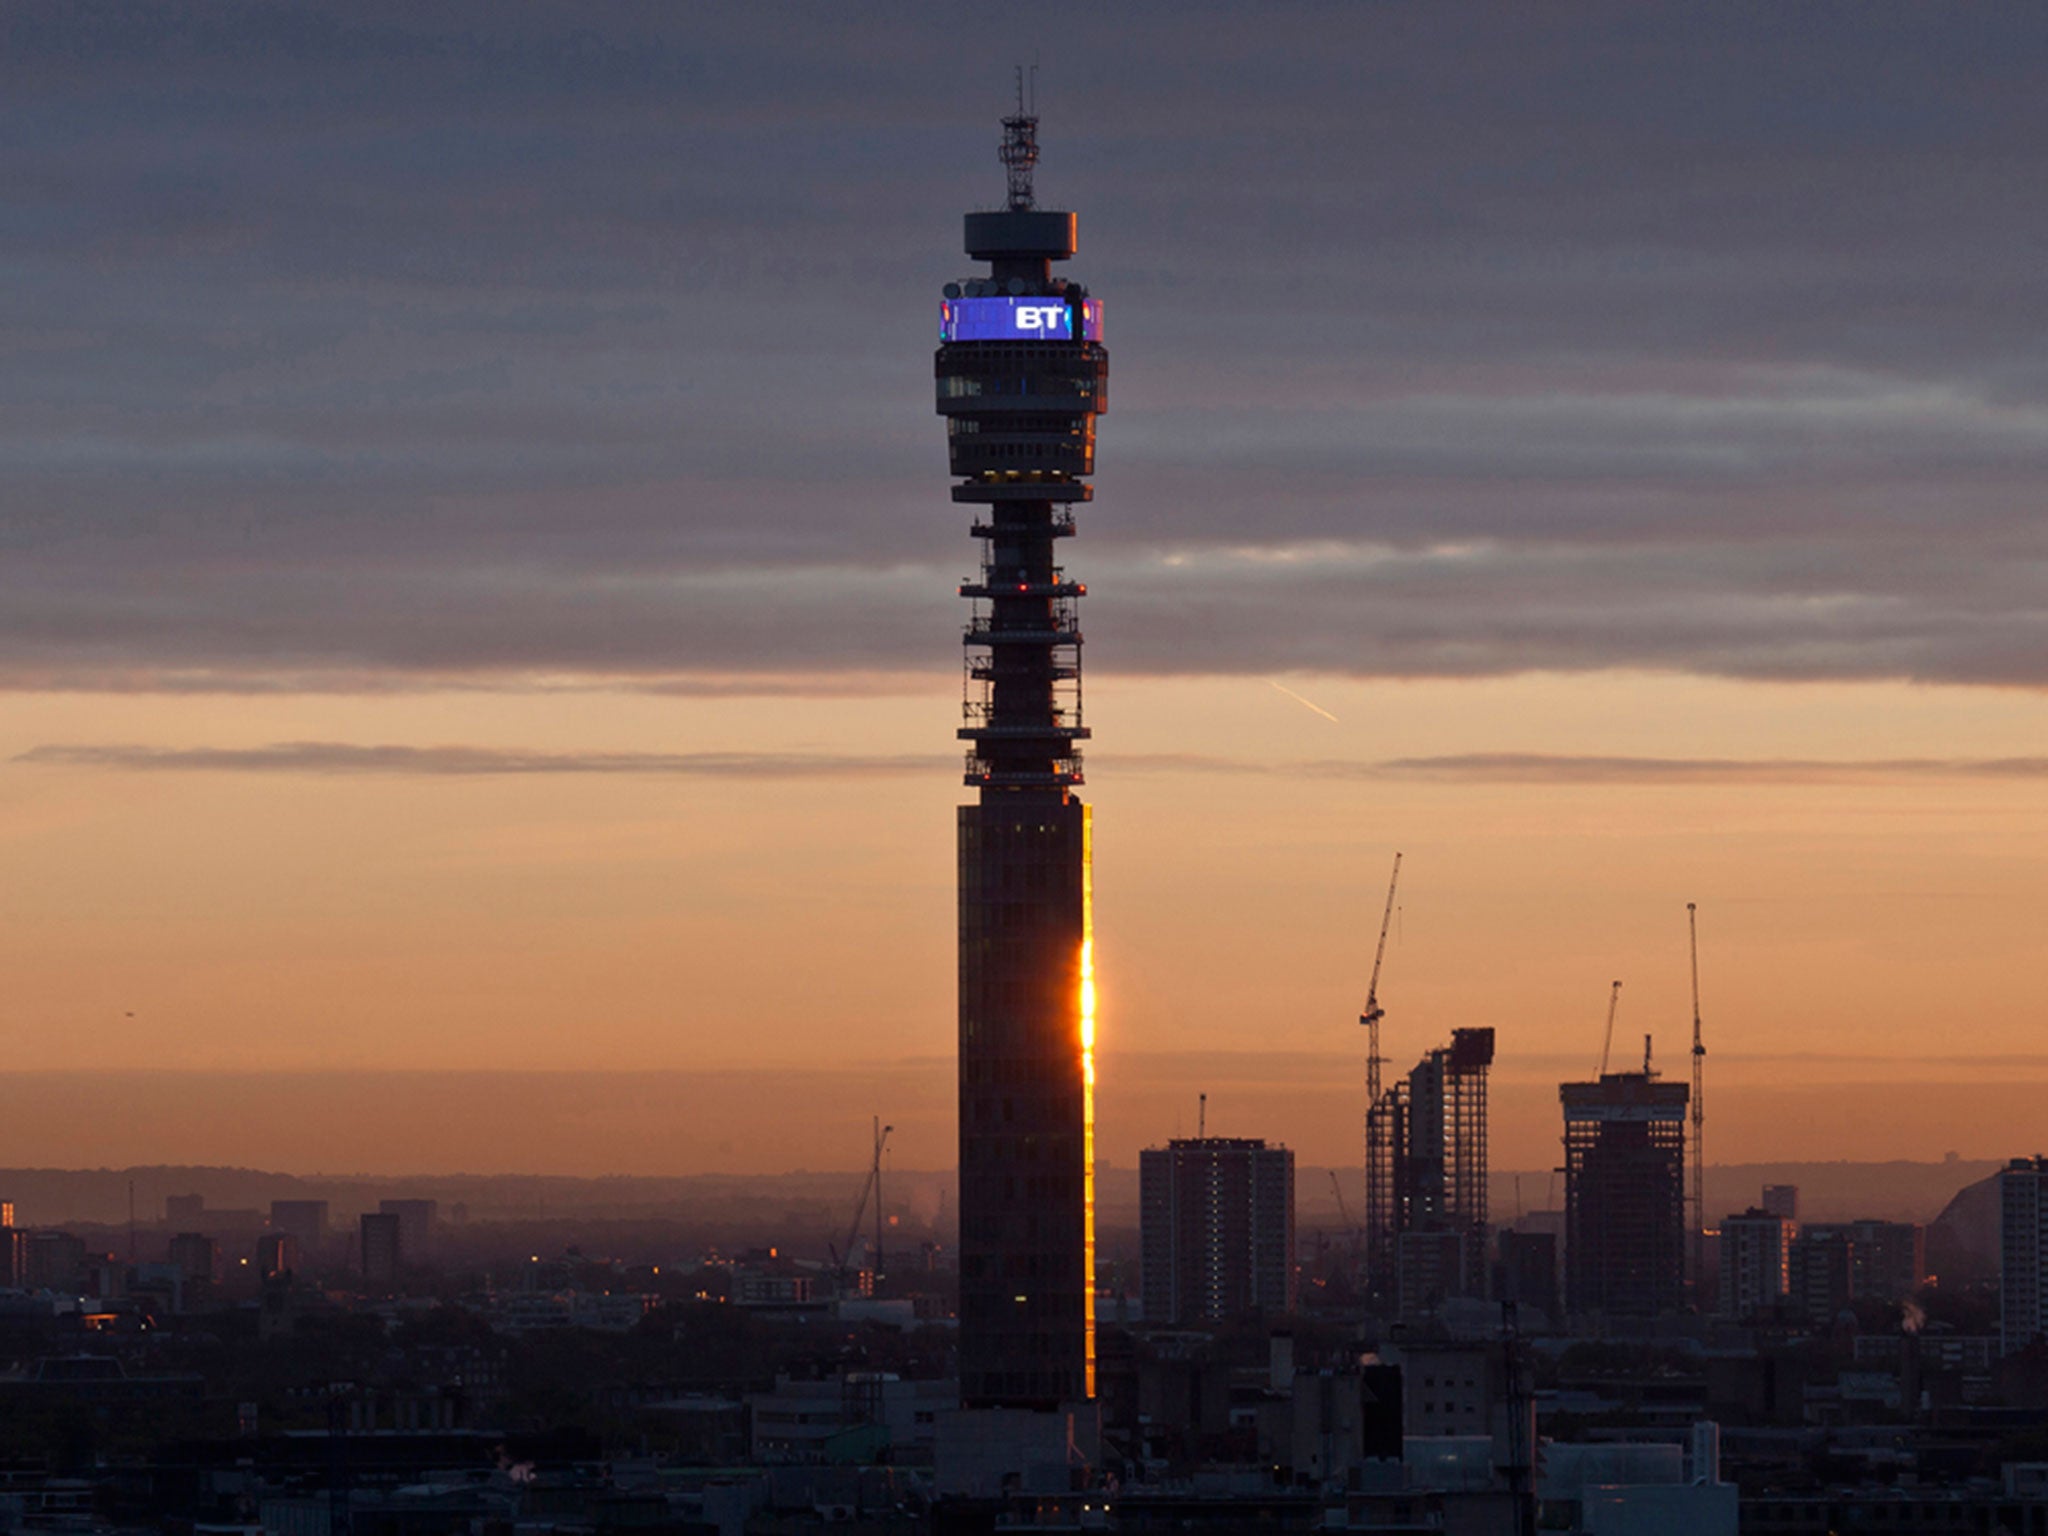 Rivals have been calling for a break-up of BT with a spin-off of Openreach